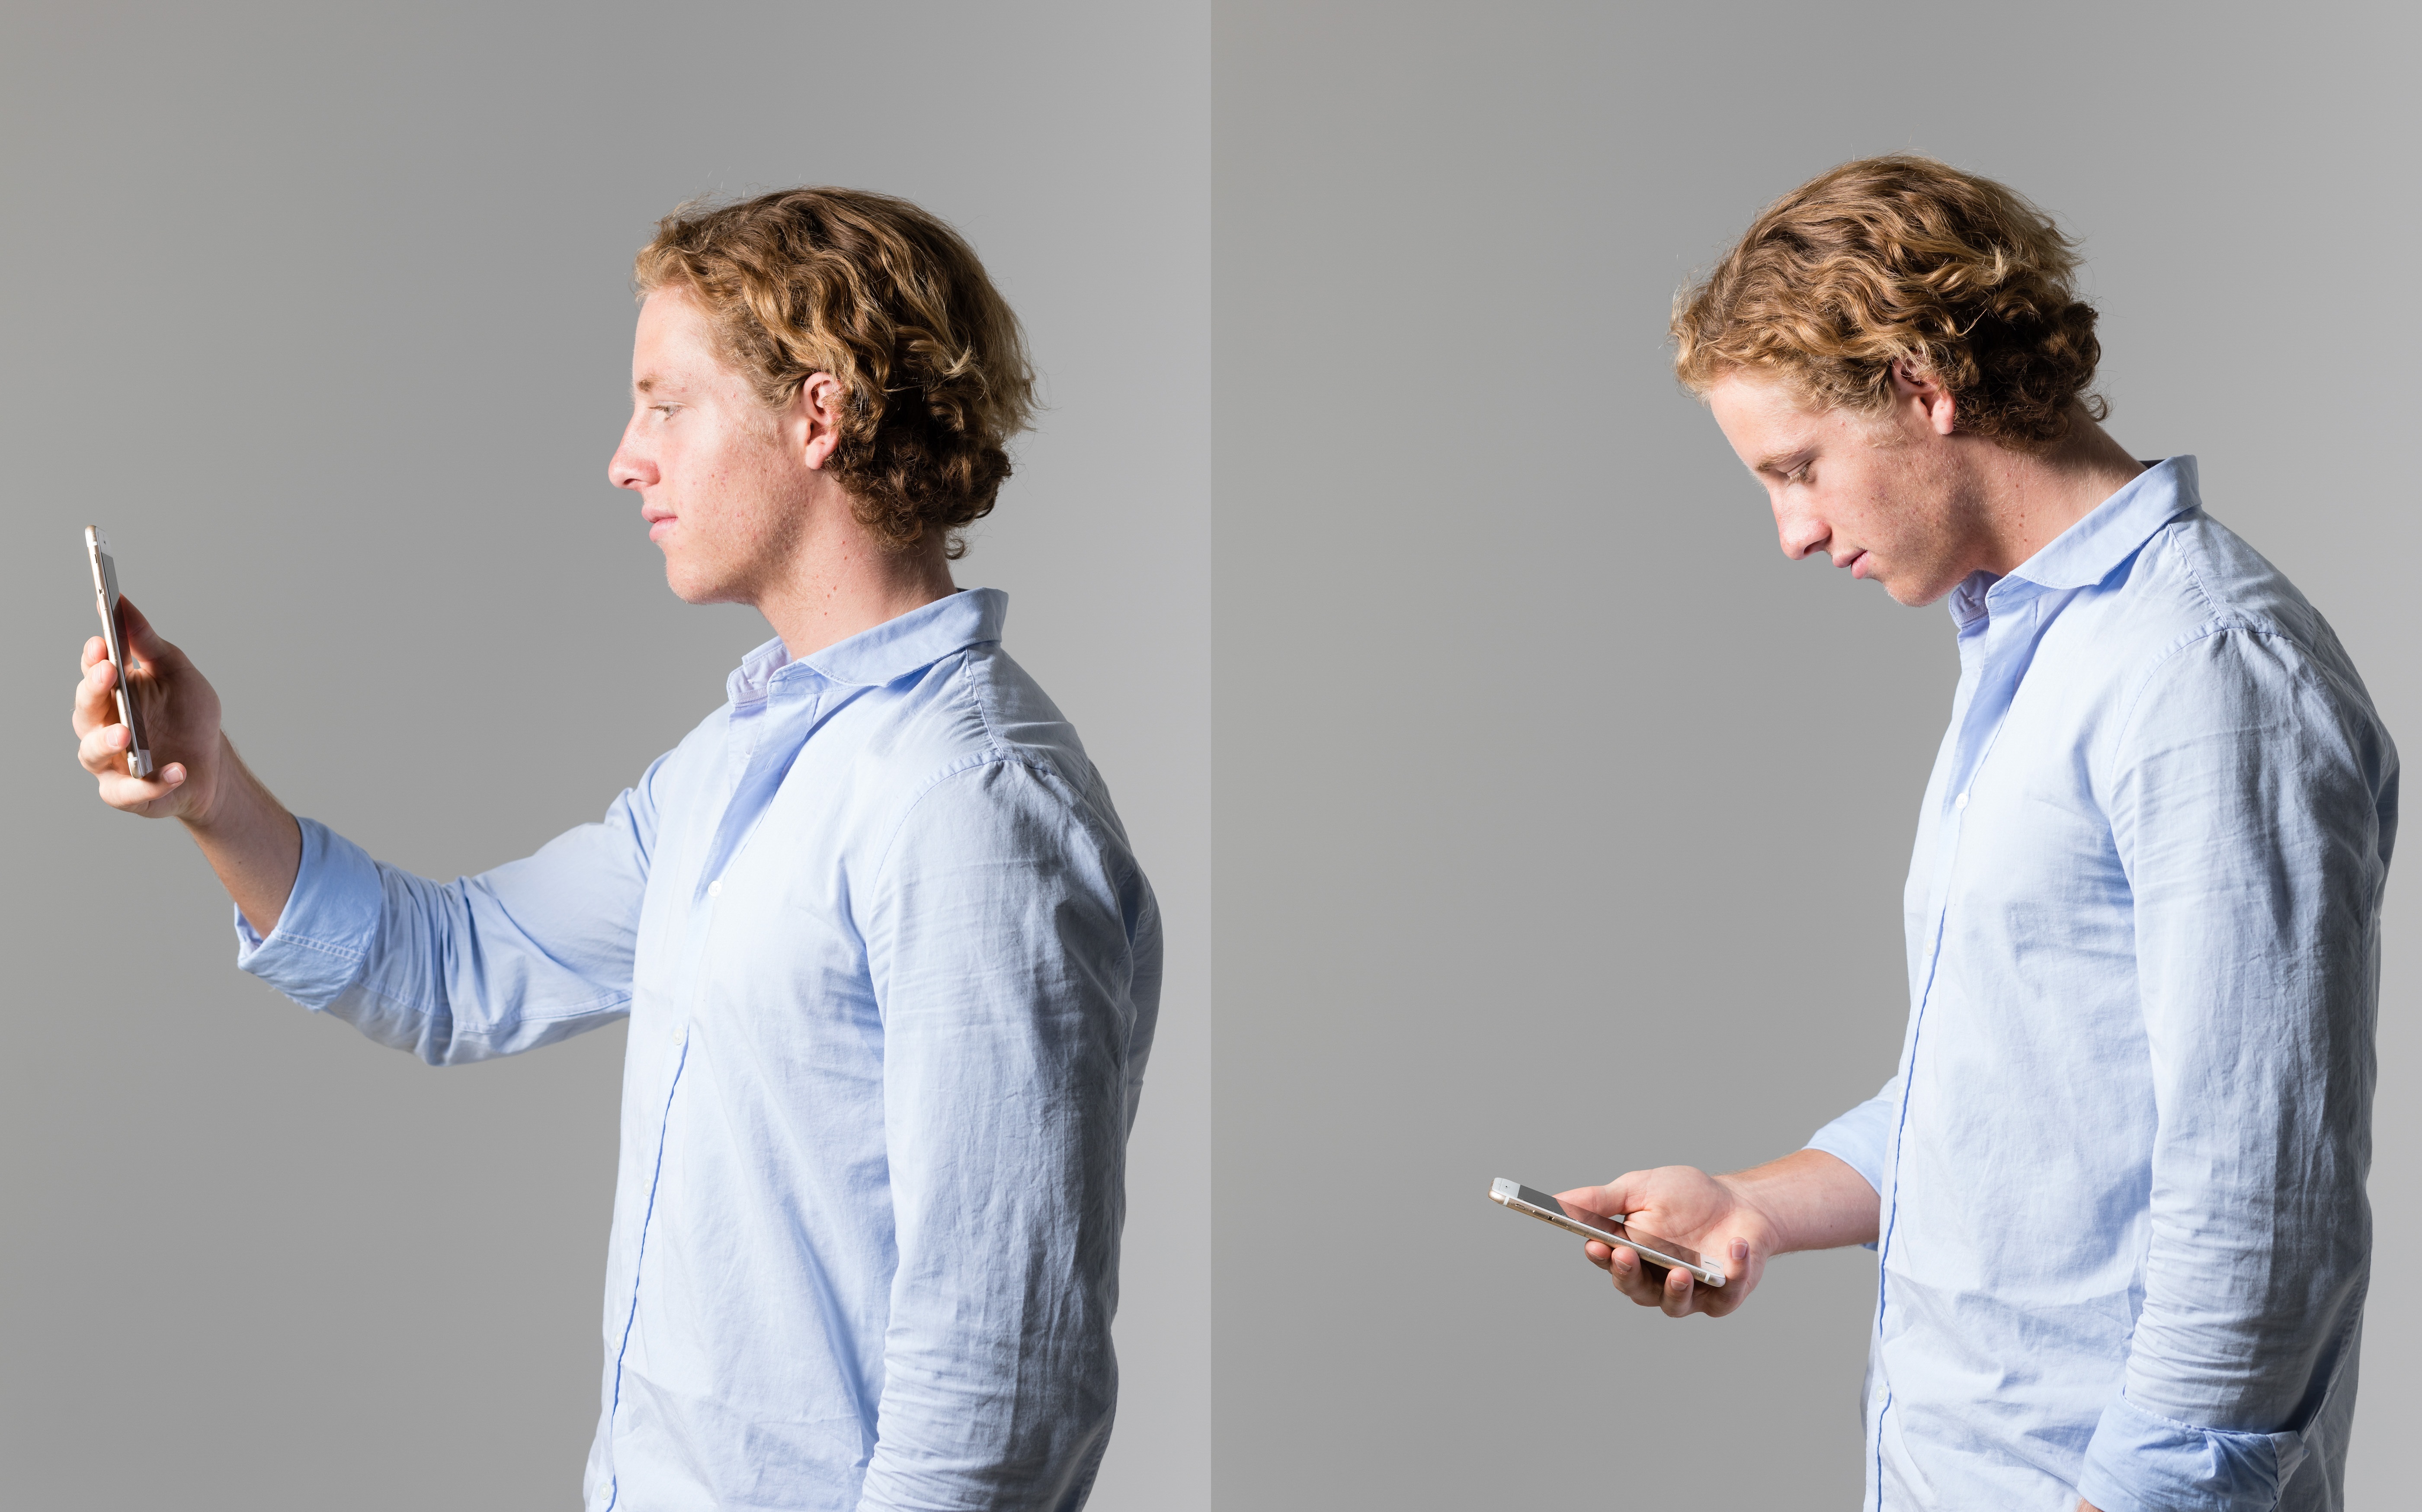 Two panel image. Left: a young man in a blue shirt holds a smart phone up in front of his face. Right: the same man holds the phone down at waist height demonstrating the neck curvature that results from looking downwards.